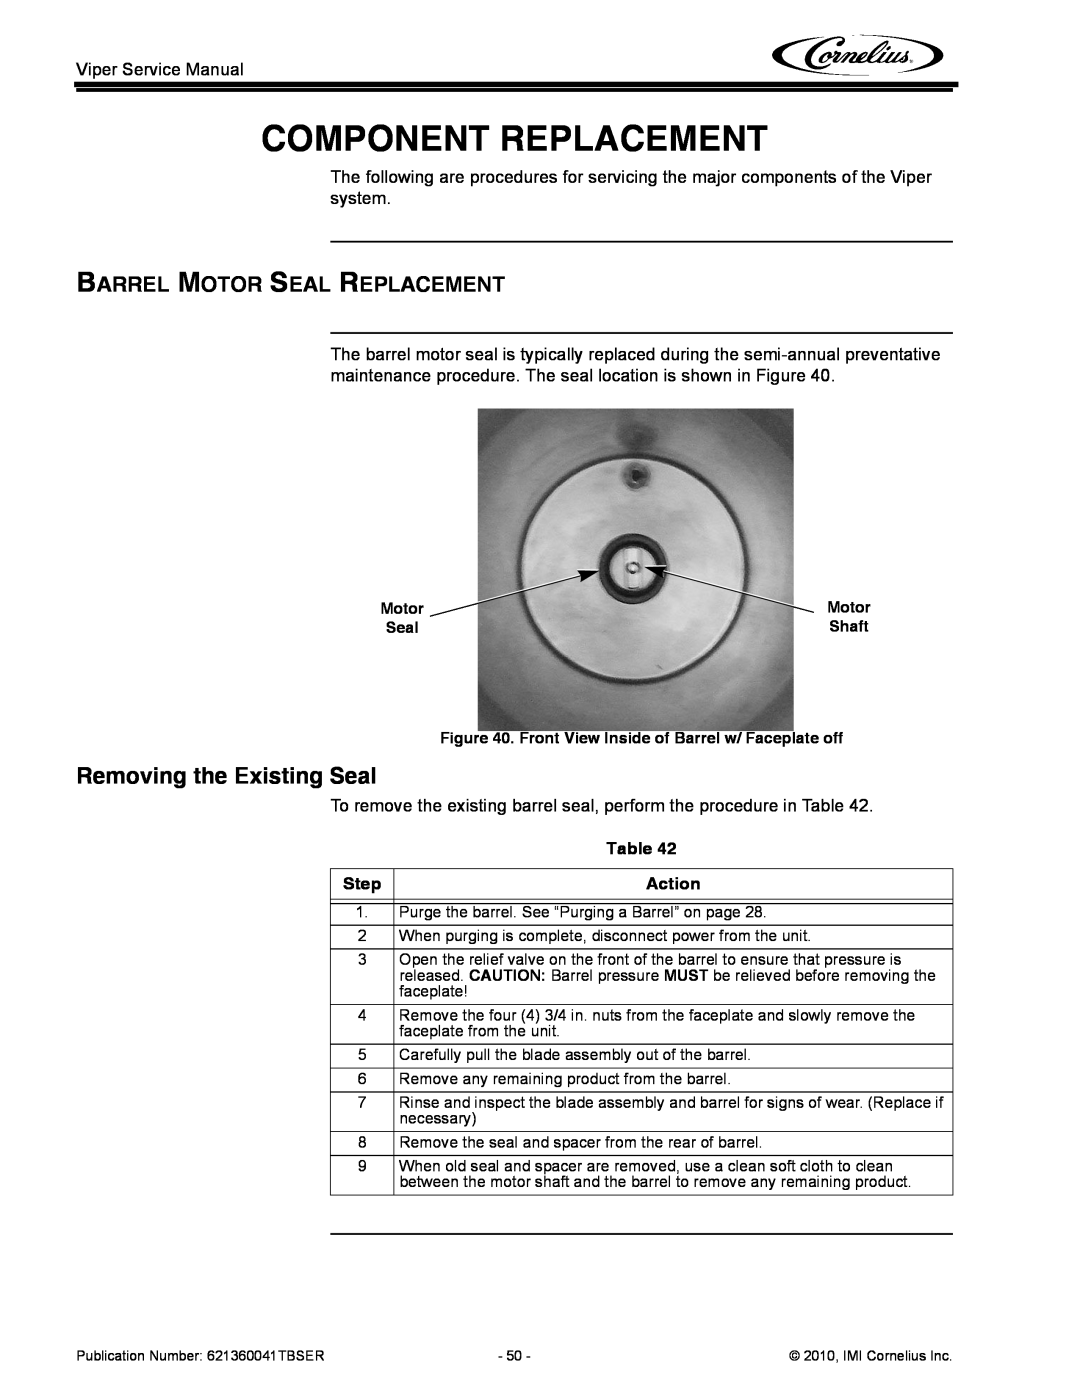 Cornelius 3 service manual Component Replacement, Removing the Existing Seal, Barrel Motor Seal Replacement, Step, Action 